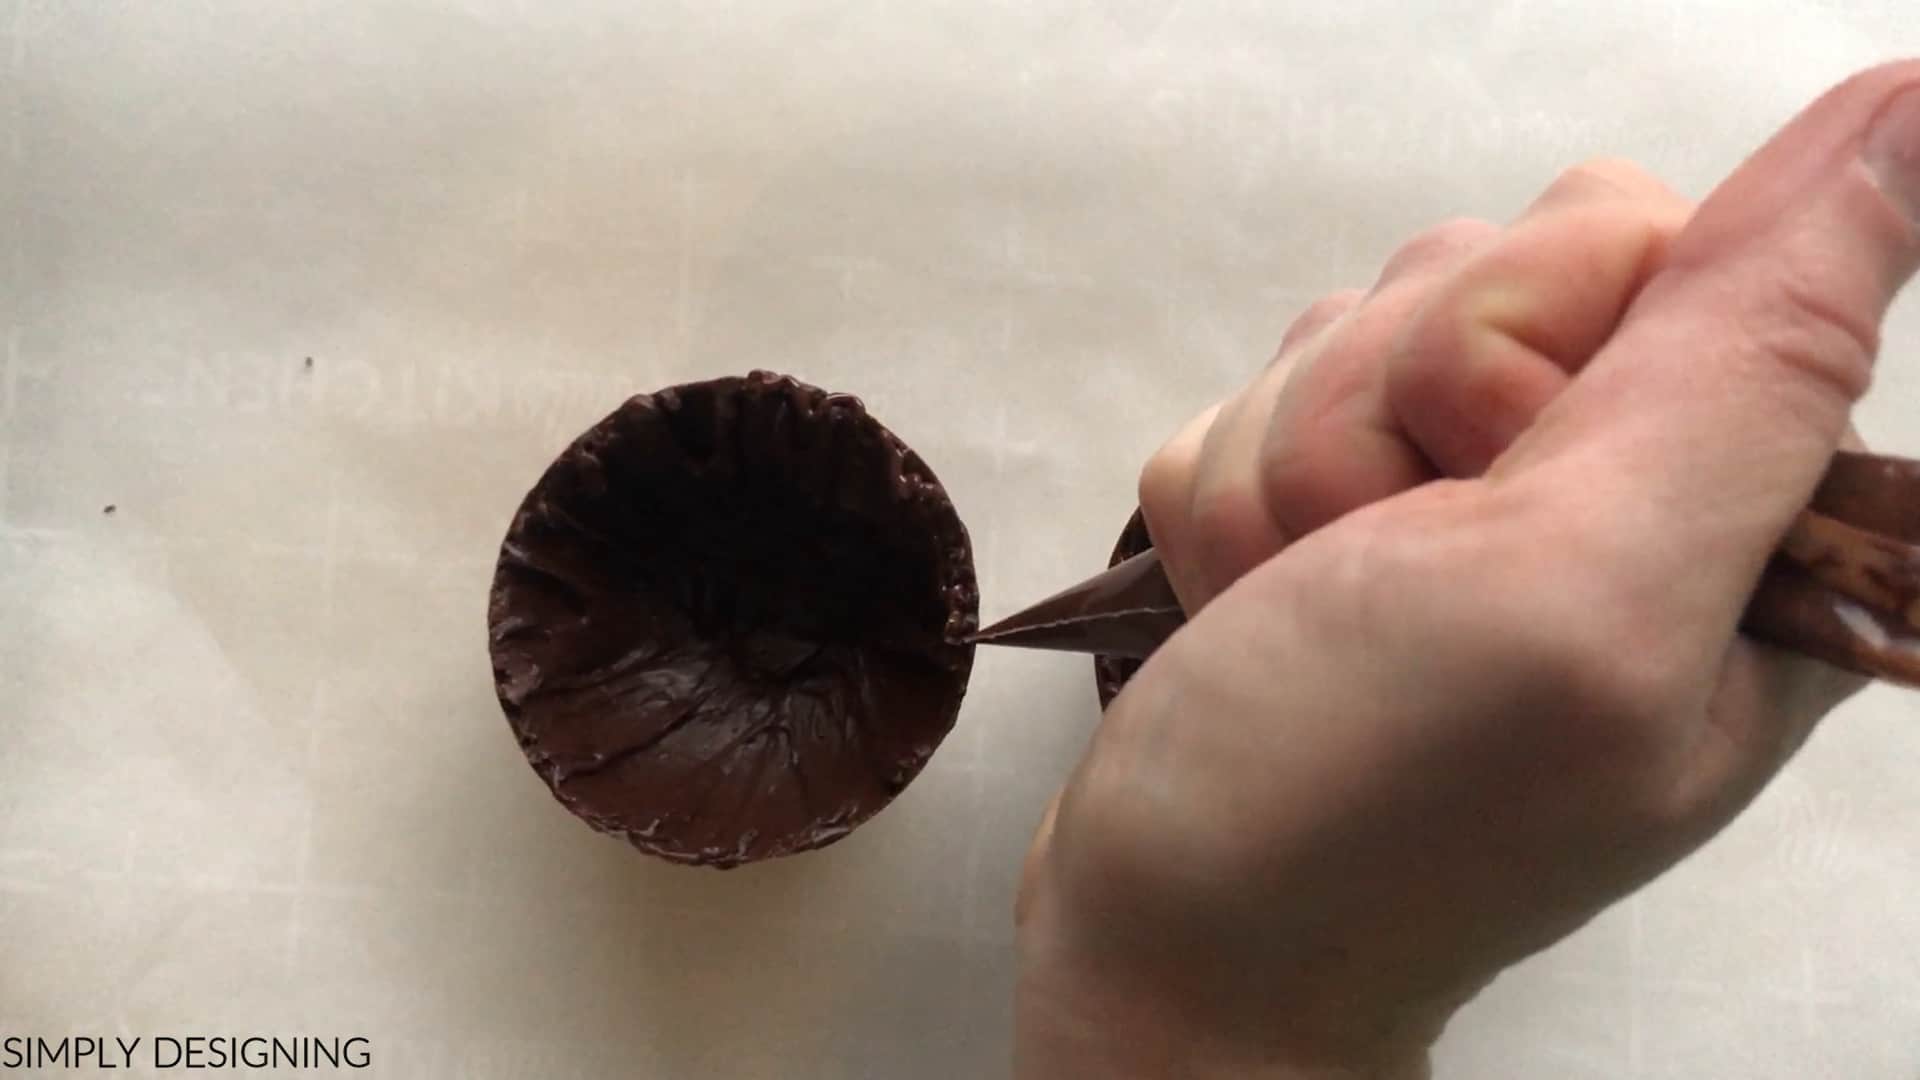 use melted chocolate to attach chocolate bomb